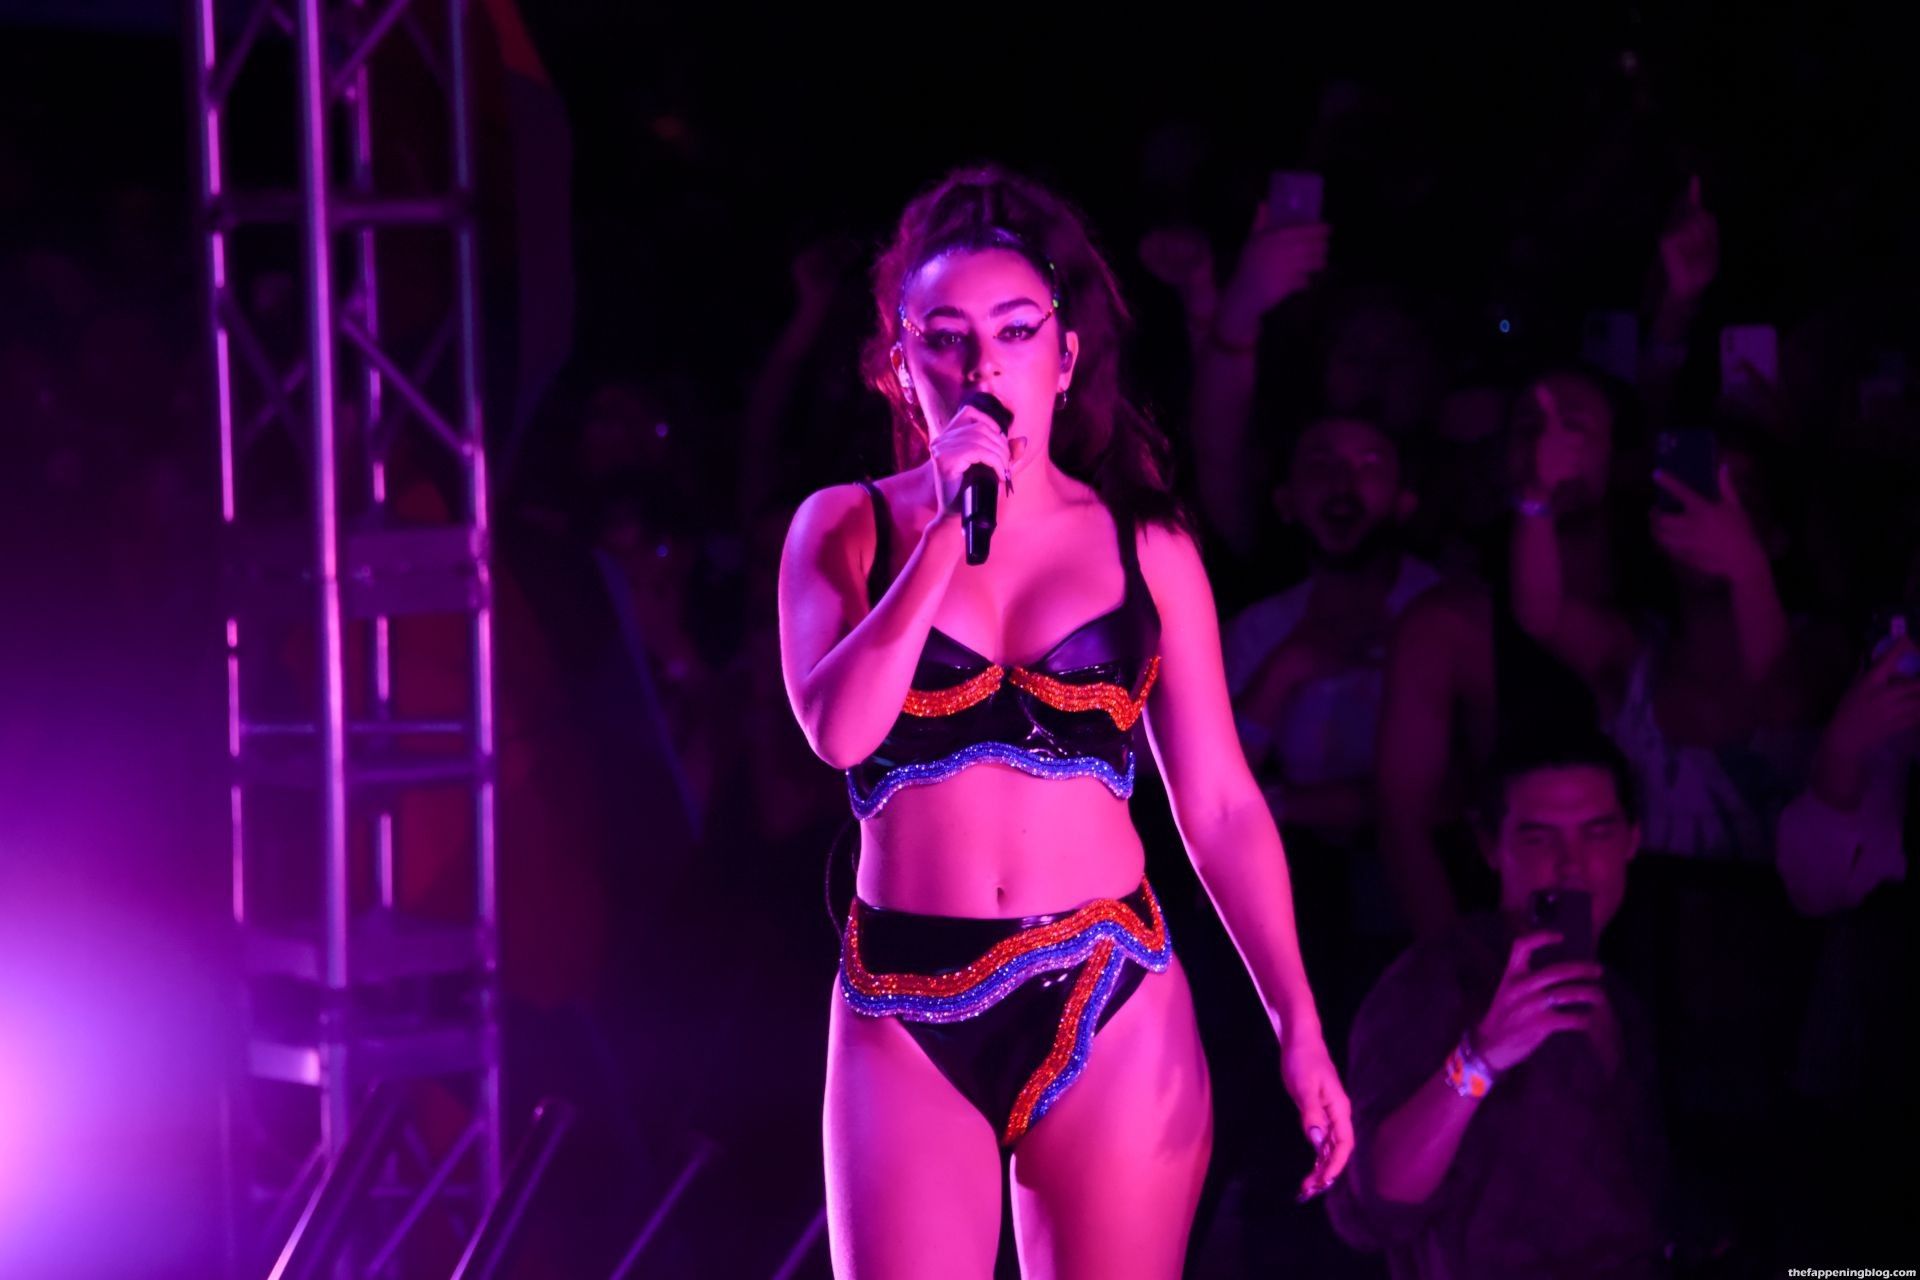 Charli-XCX-Sexy-on-Stage-16-thefappeningblog.com_.jpg